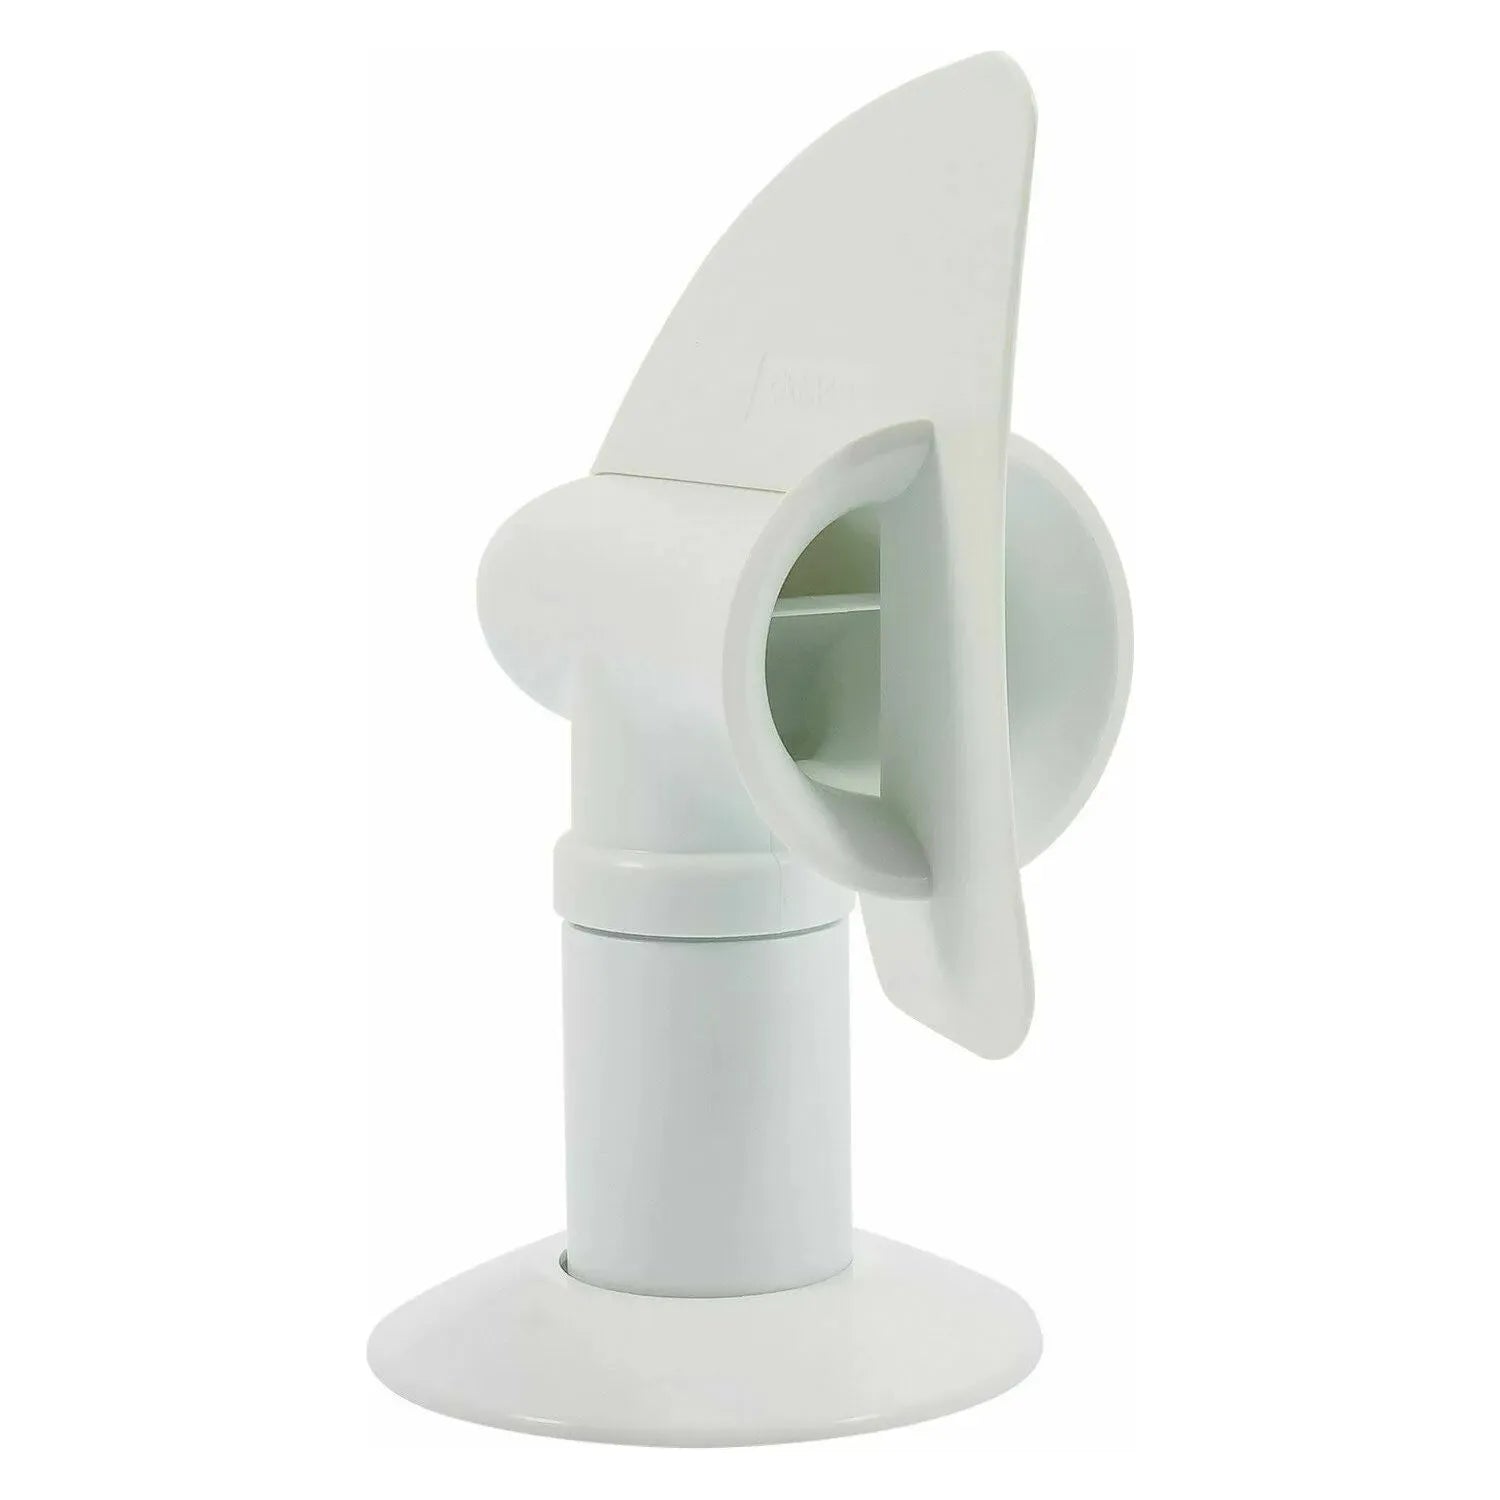 Camco Cyclone Plumbing Vent - White 40595